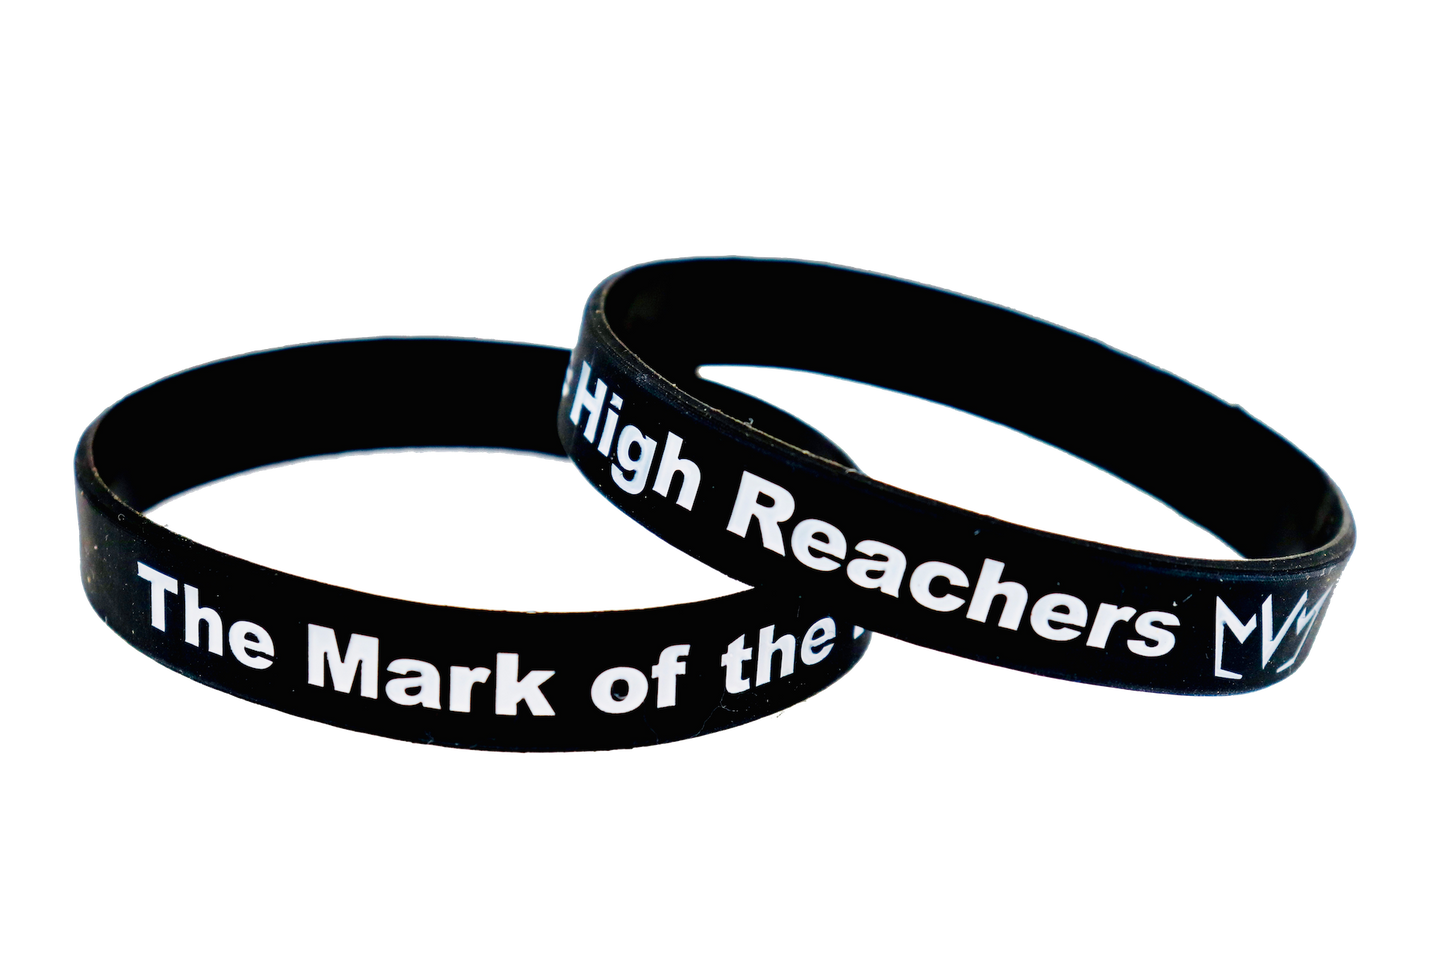 The Mark of the High Reachers Silicone Wristband in black.